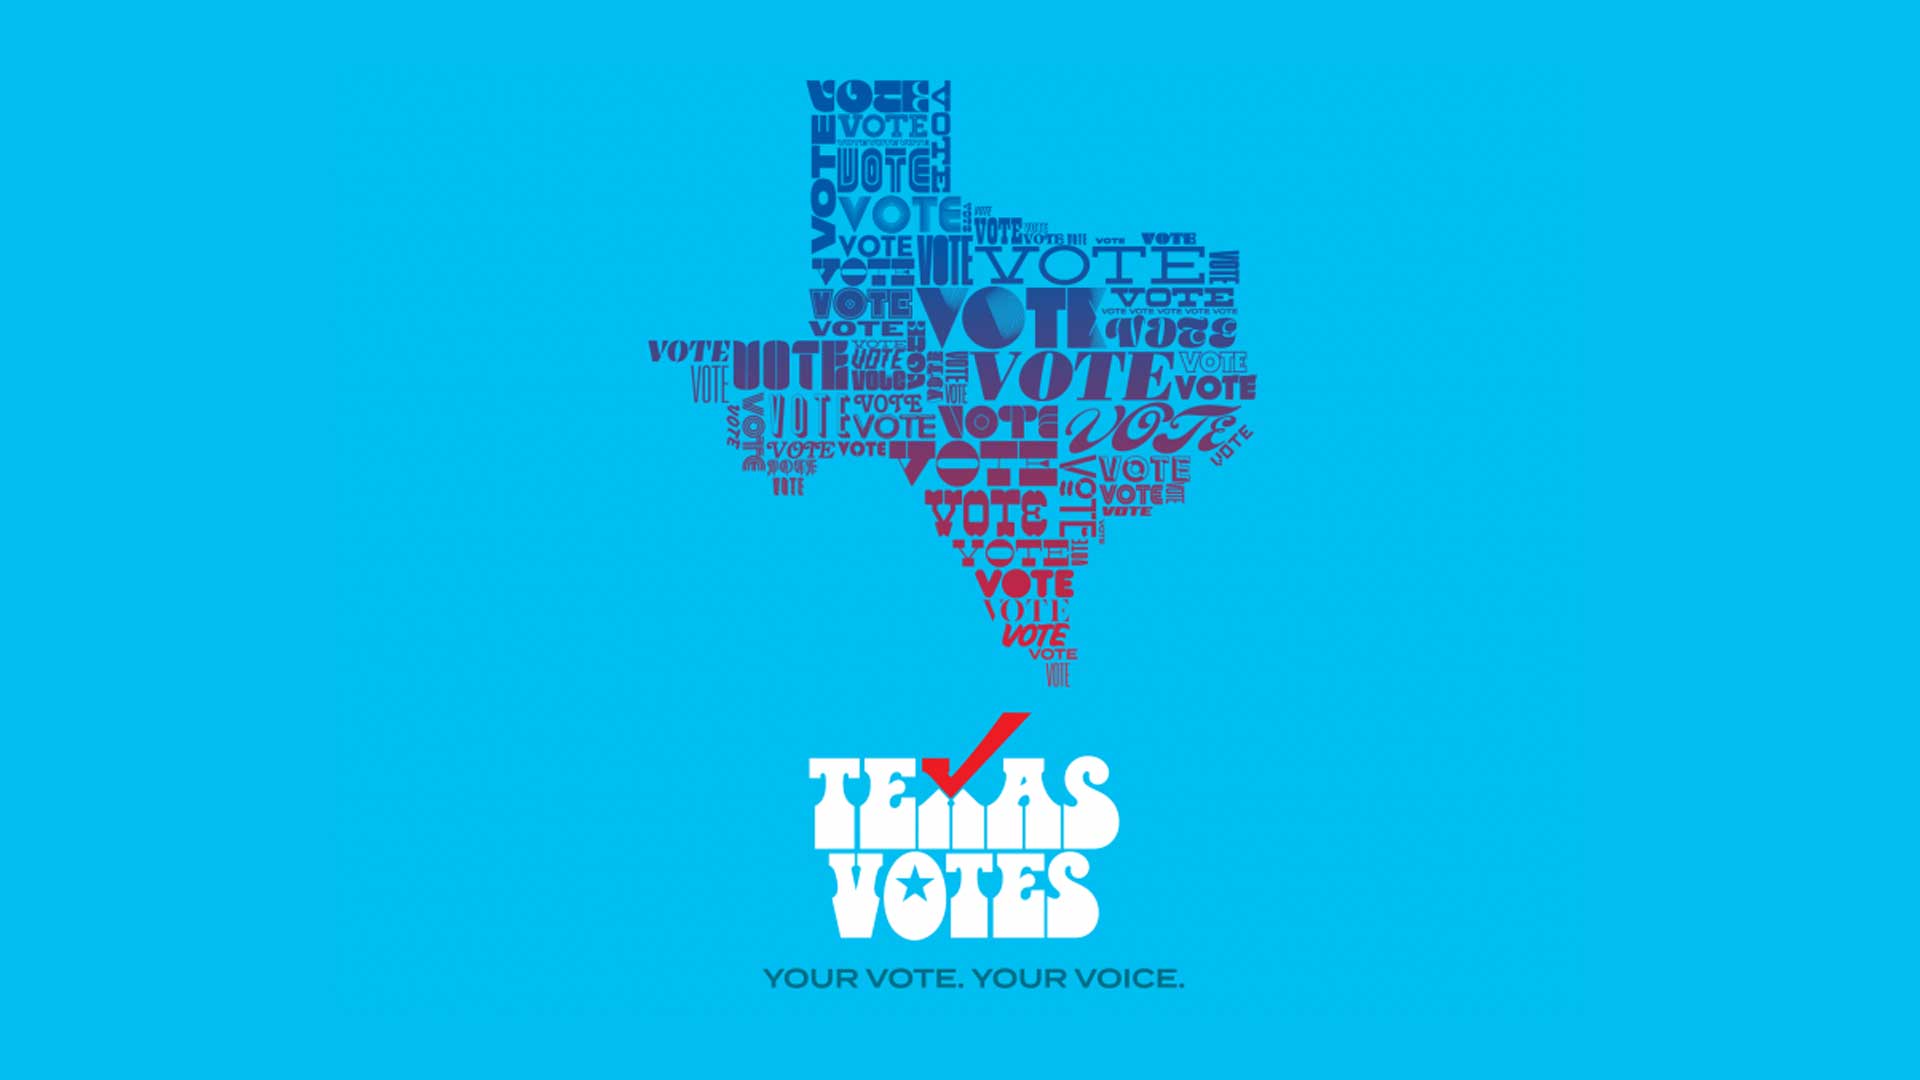 "Texas Votes" graphic designed by Jason Malmberg for Headcount, a voter registration organization